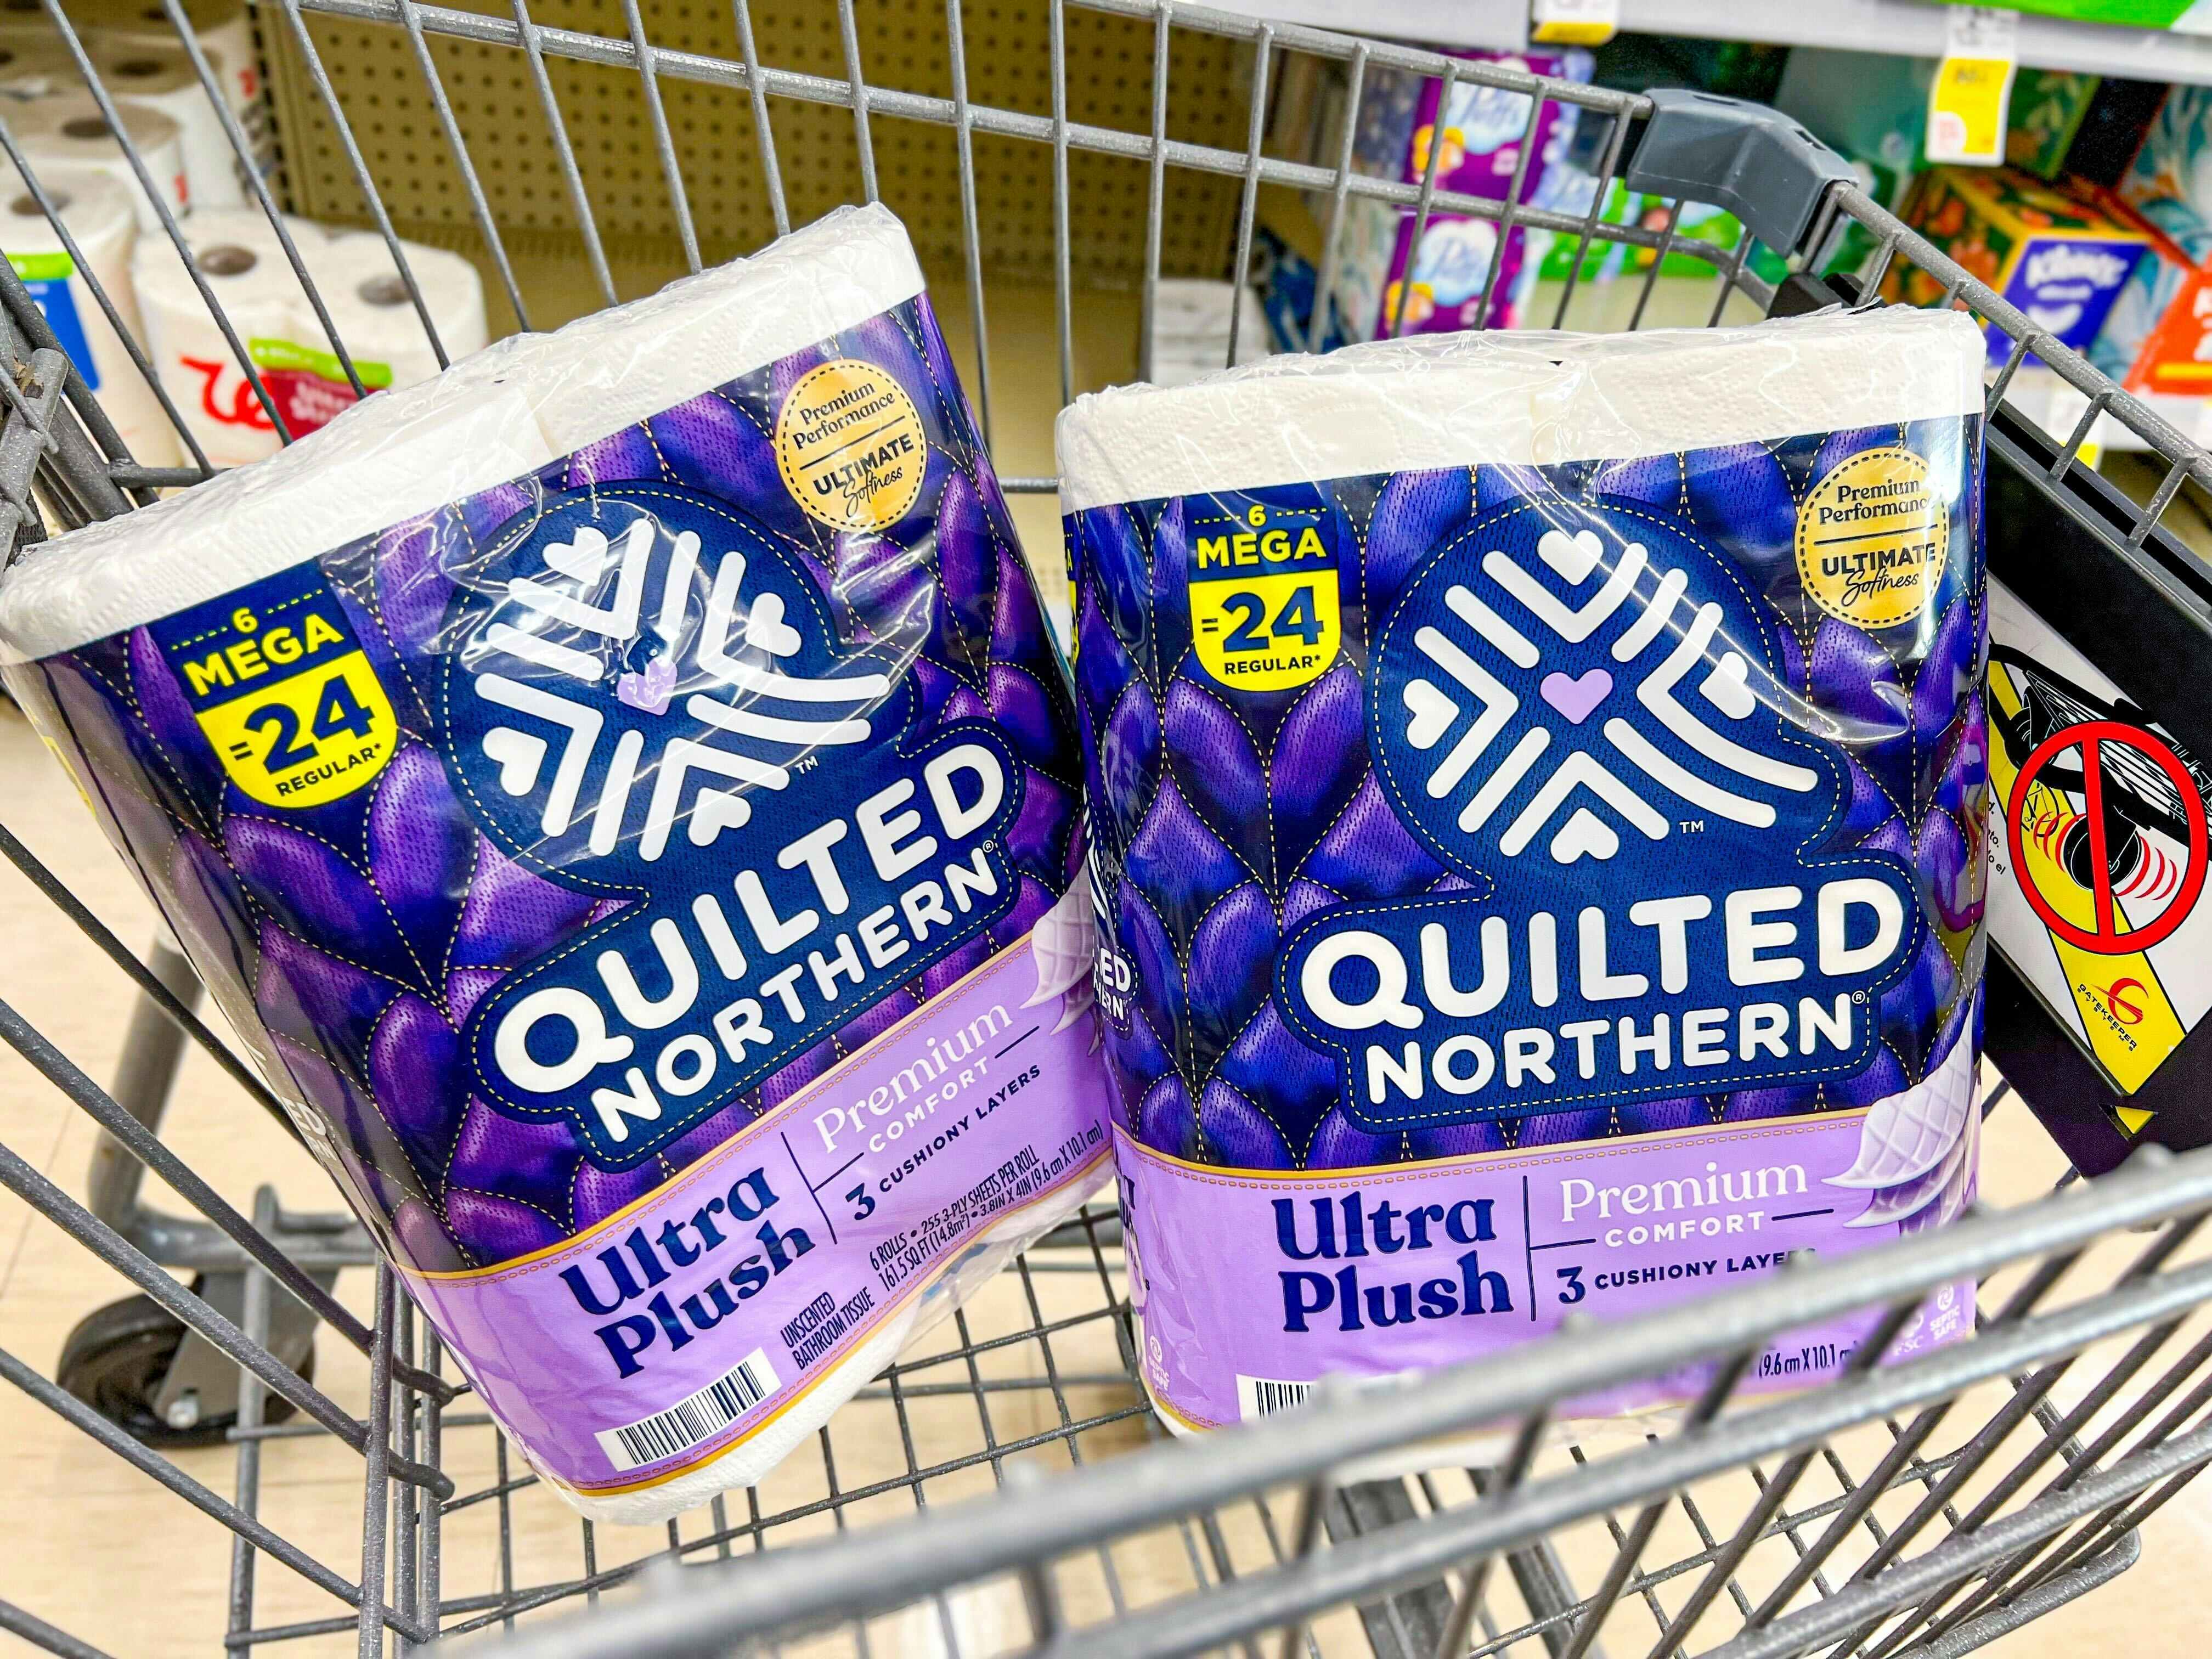 $1.50 Quilted Northern Coupon — Claim Now